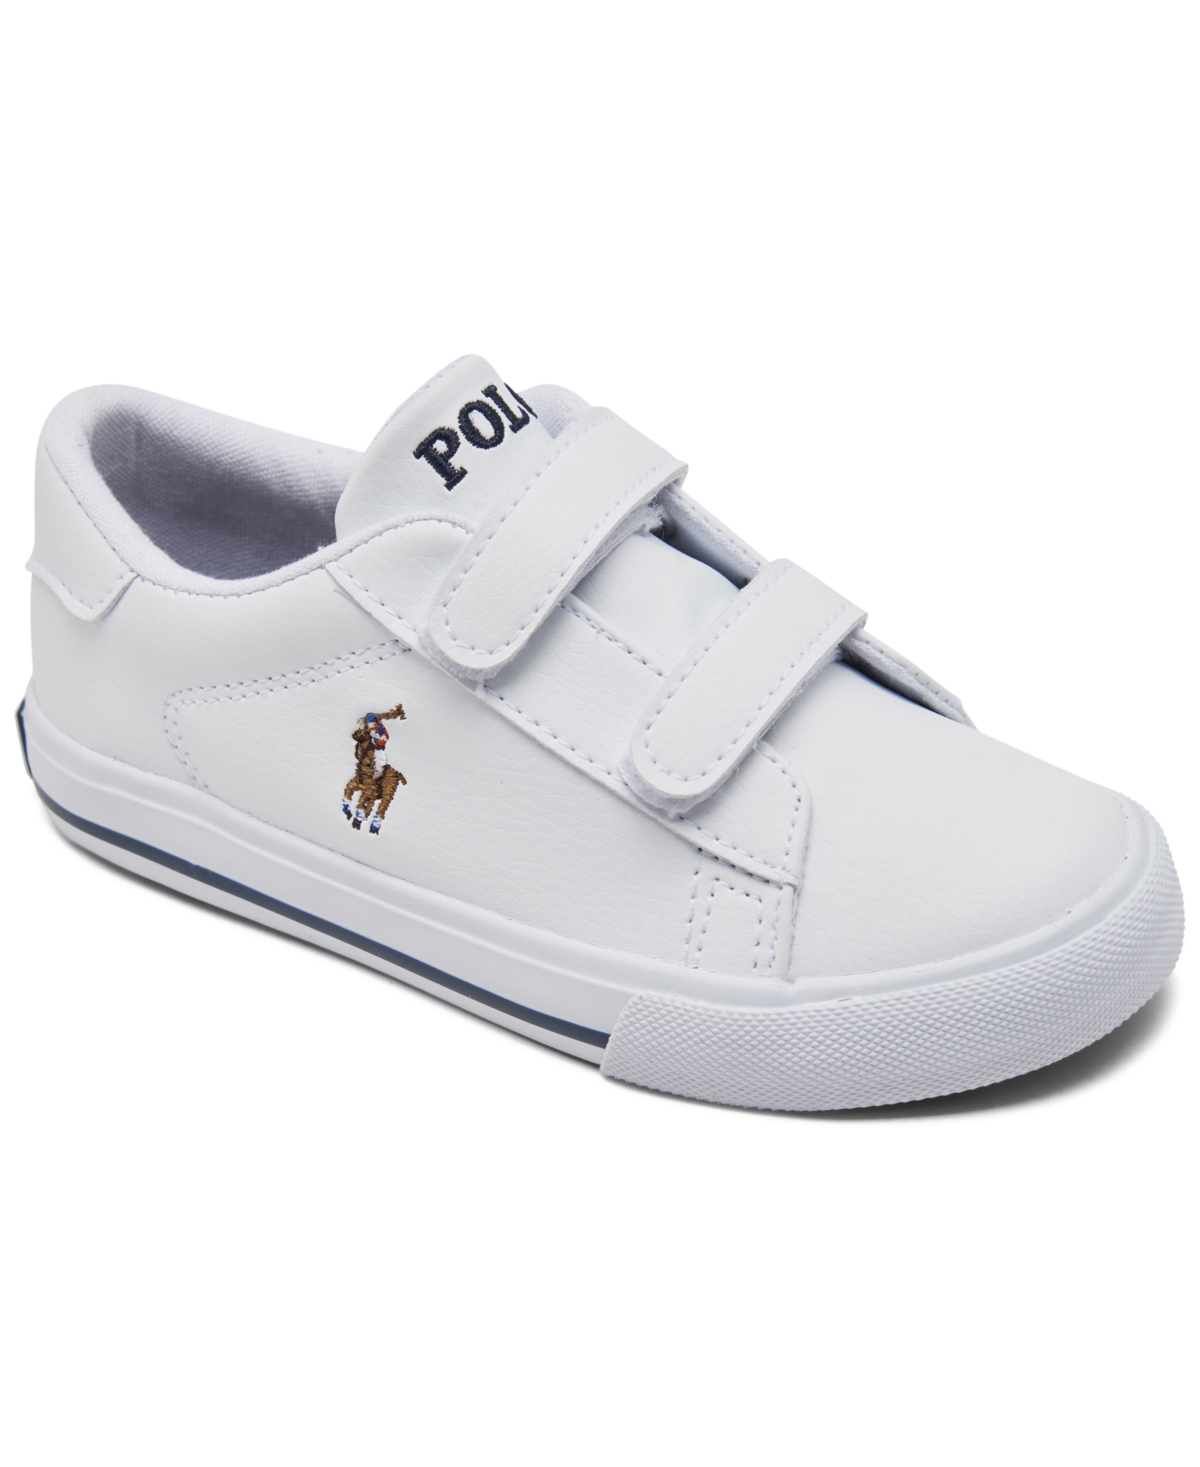 Polo Ralph Lauren Babies' Toddler Boys' Easten Ii Ez Casual Sneakers From Finish Line In White Tumbled